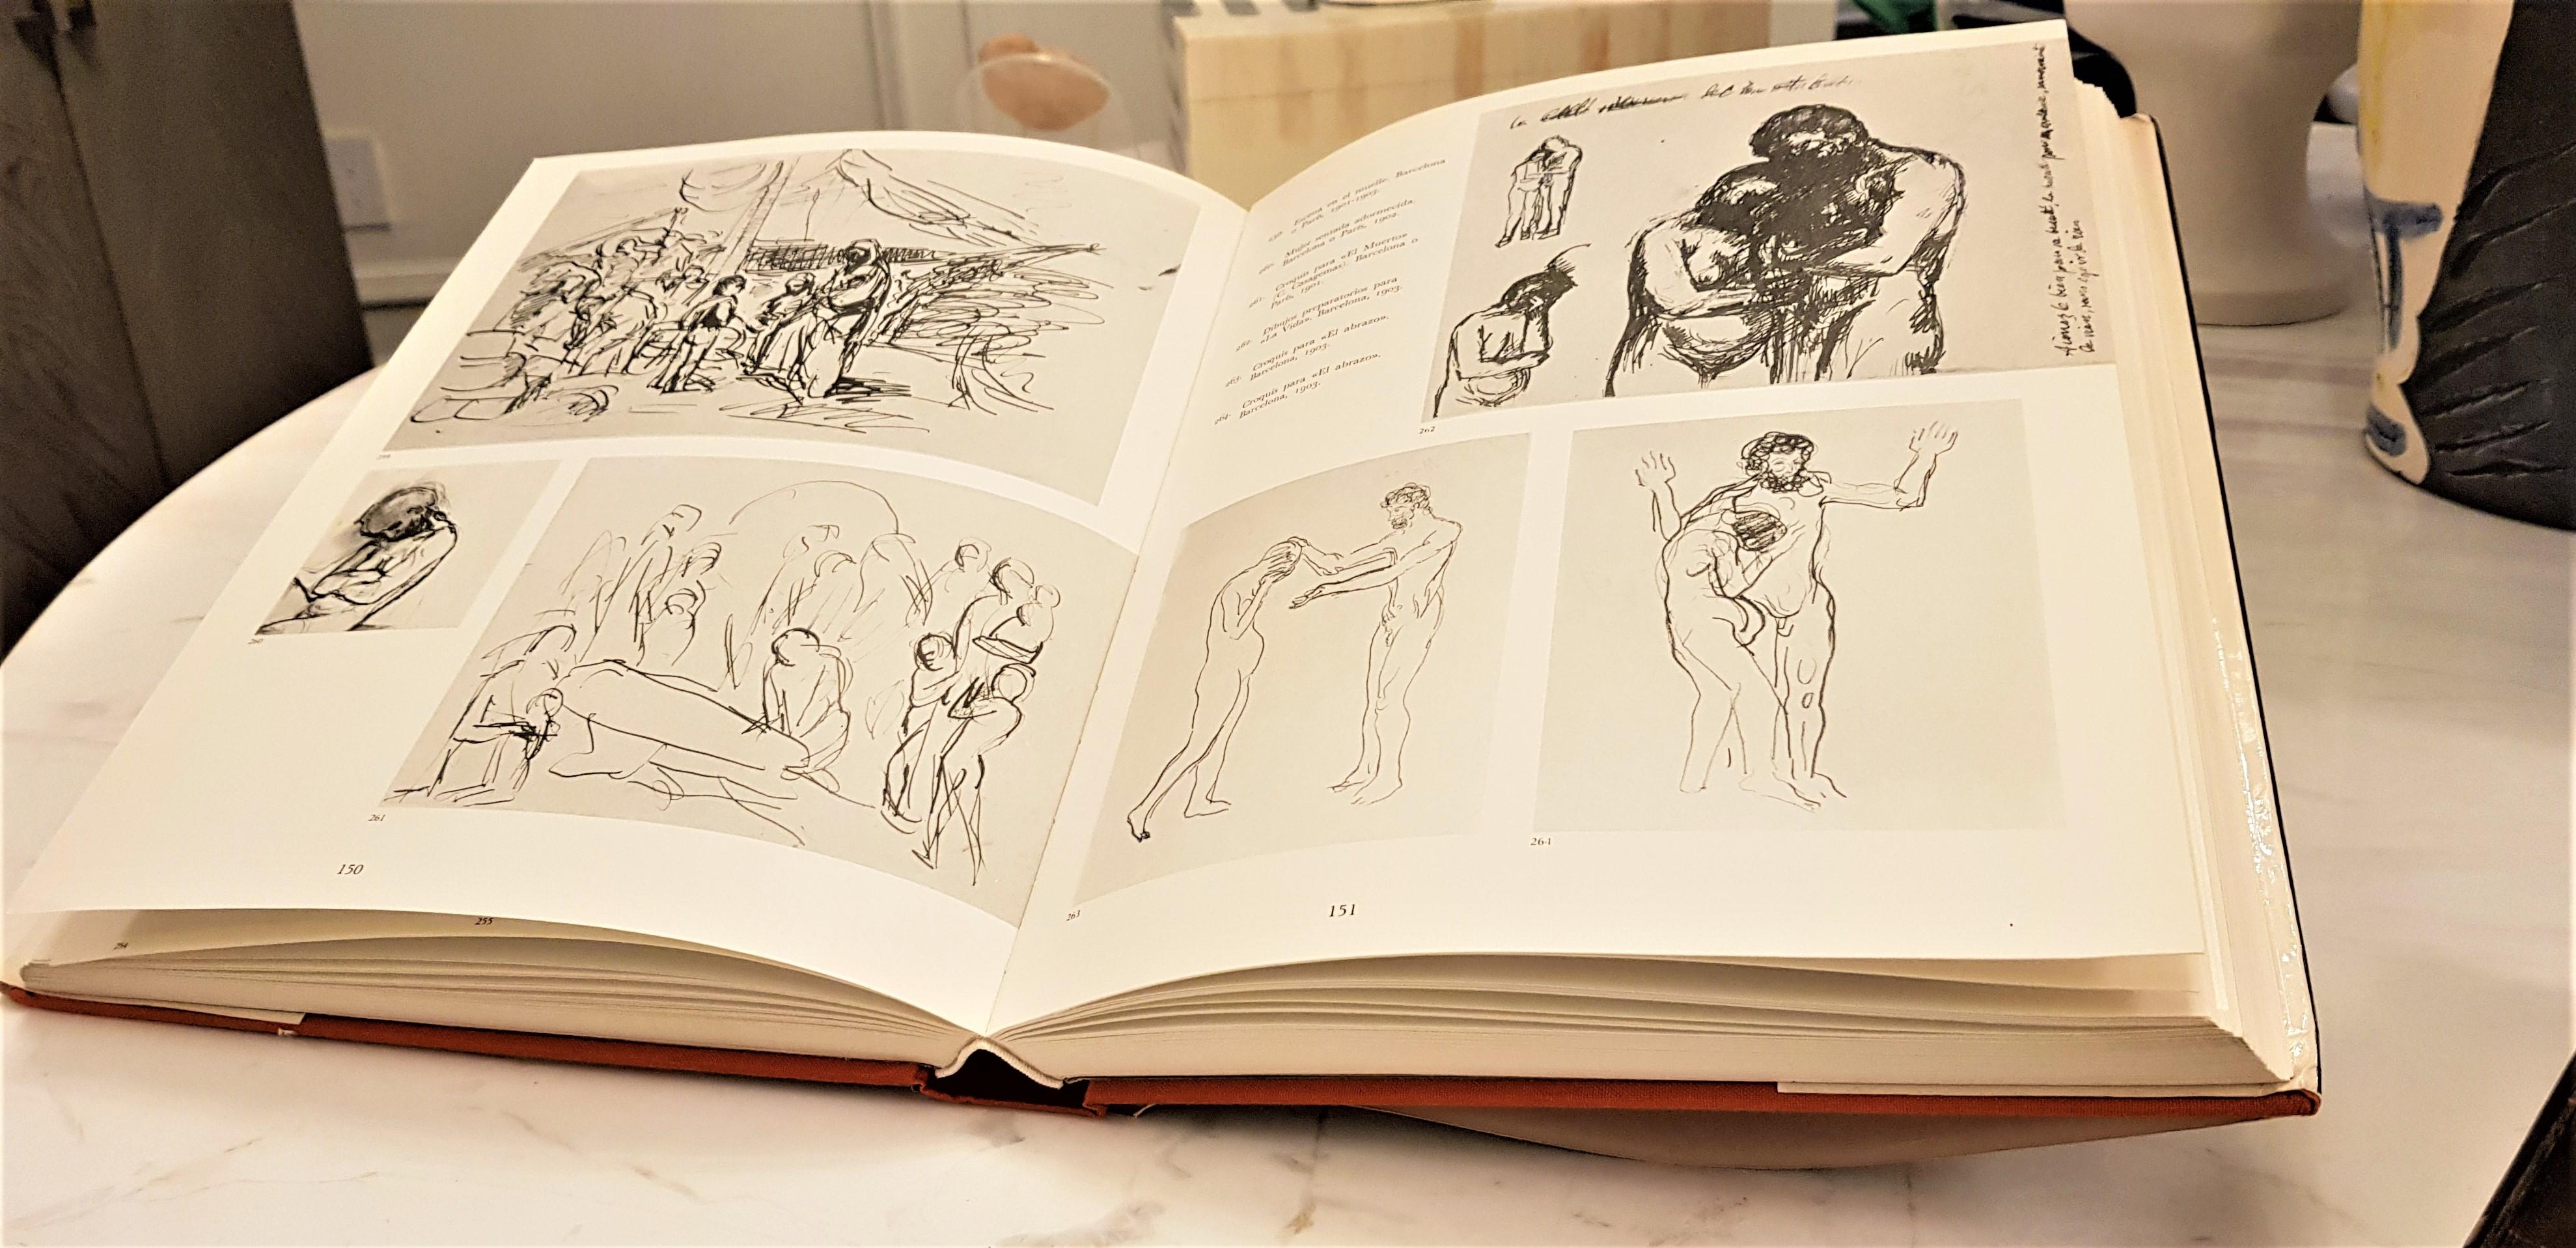 This coffee table book displays beautiful and unique Picasso drawings and illustrations. The cover is inscribed by Picasso.

Signed and dated by Picasso 6/12/72. The book comes with a signed authorisation card from Claude Picasso on October 9th